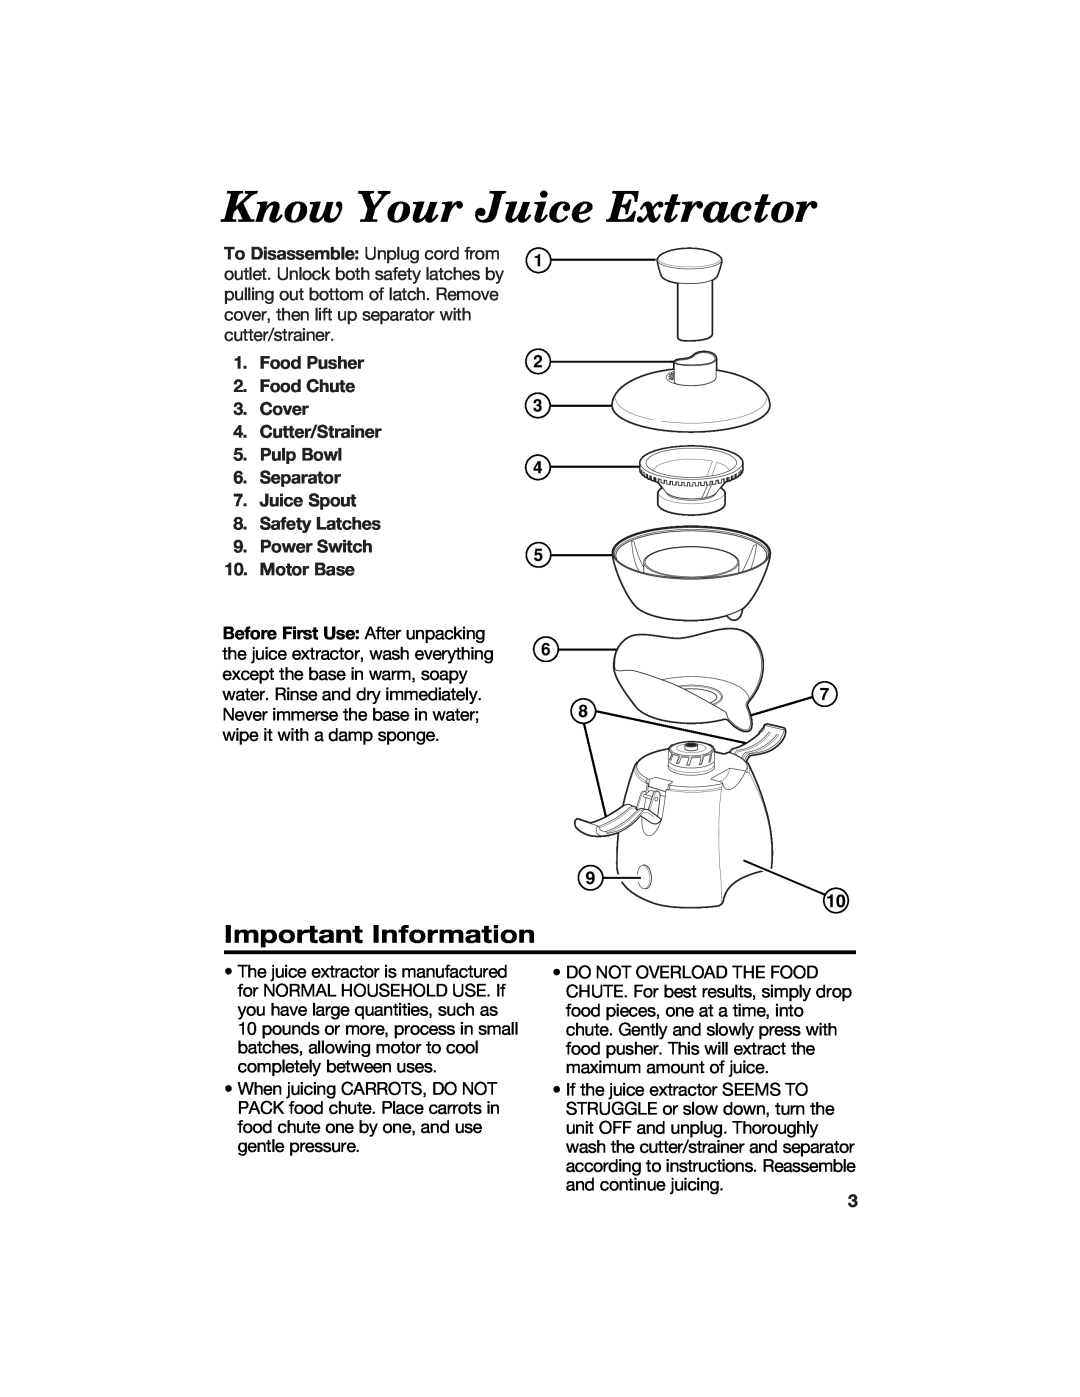 Hamilton Beach 67333 manual Know Your Juice Extractor, Important Information 